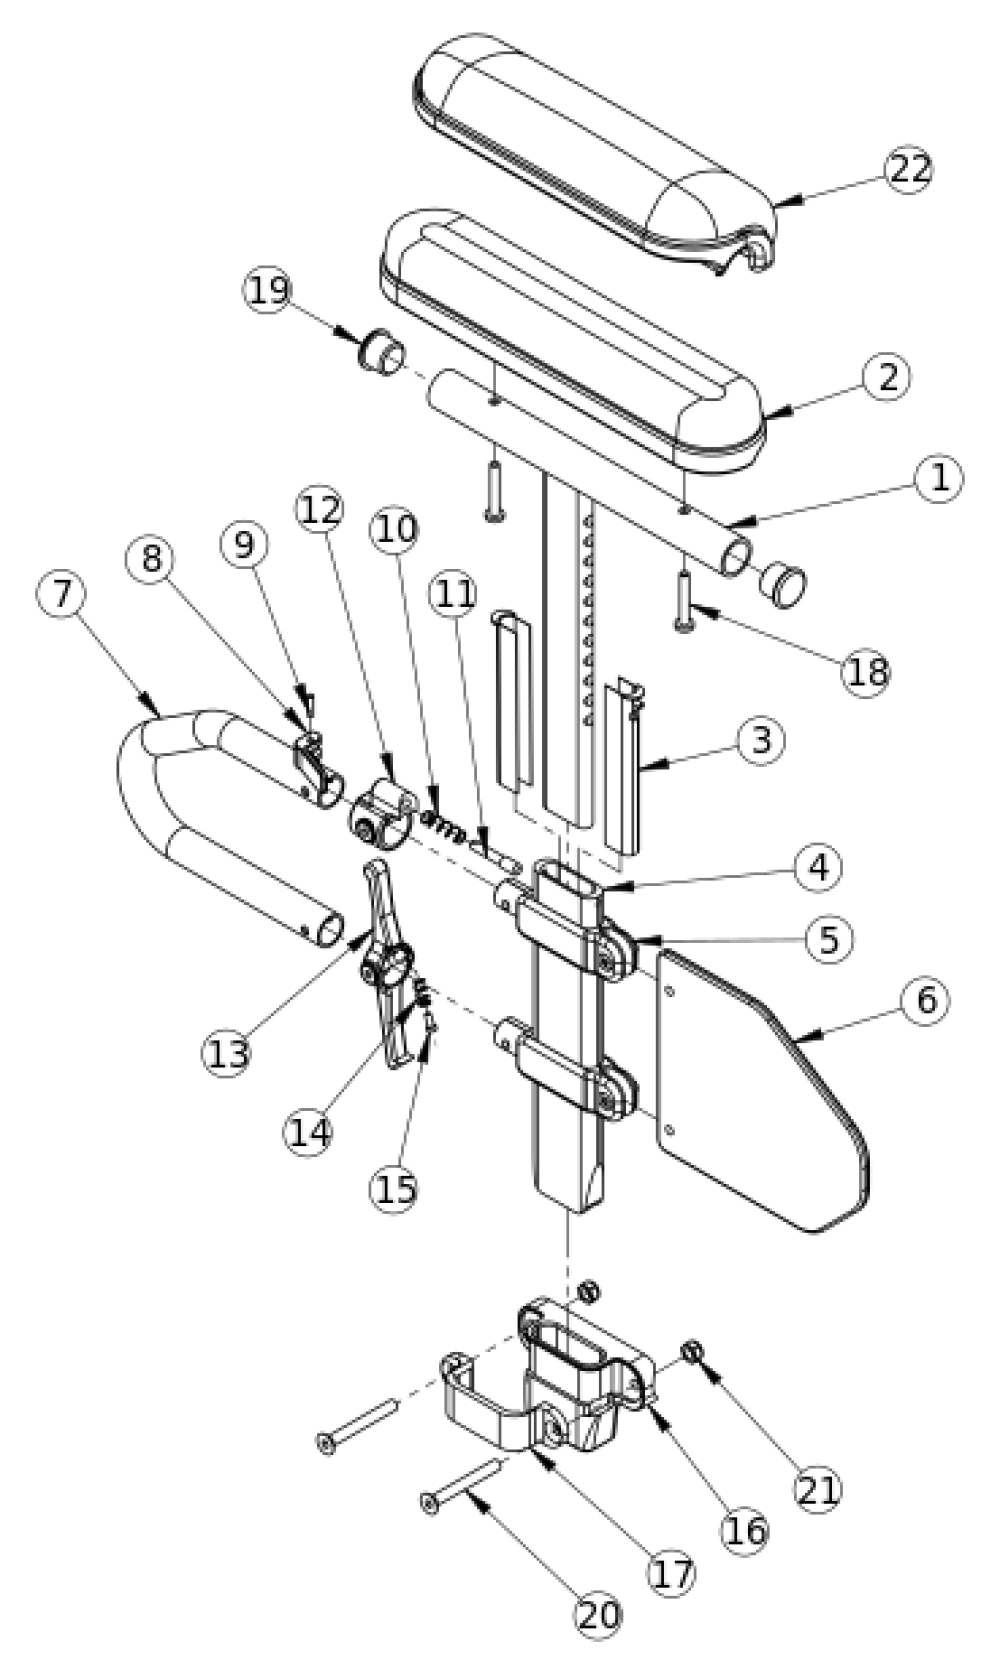 (discontinued) Rogue Xp Height Adjustable T-arm parts diagram